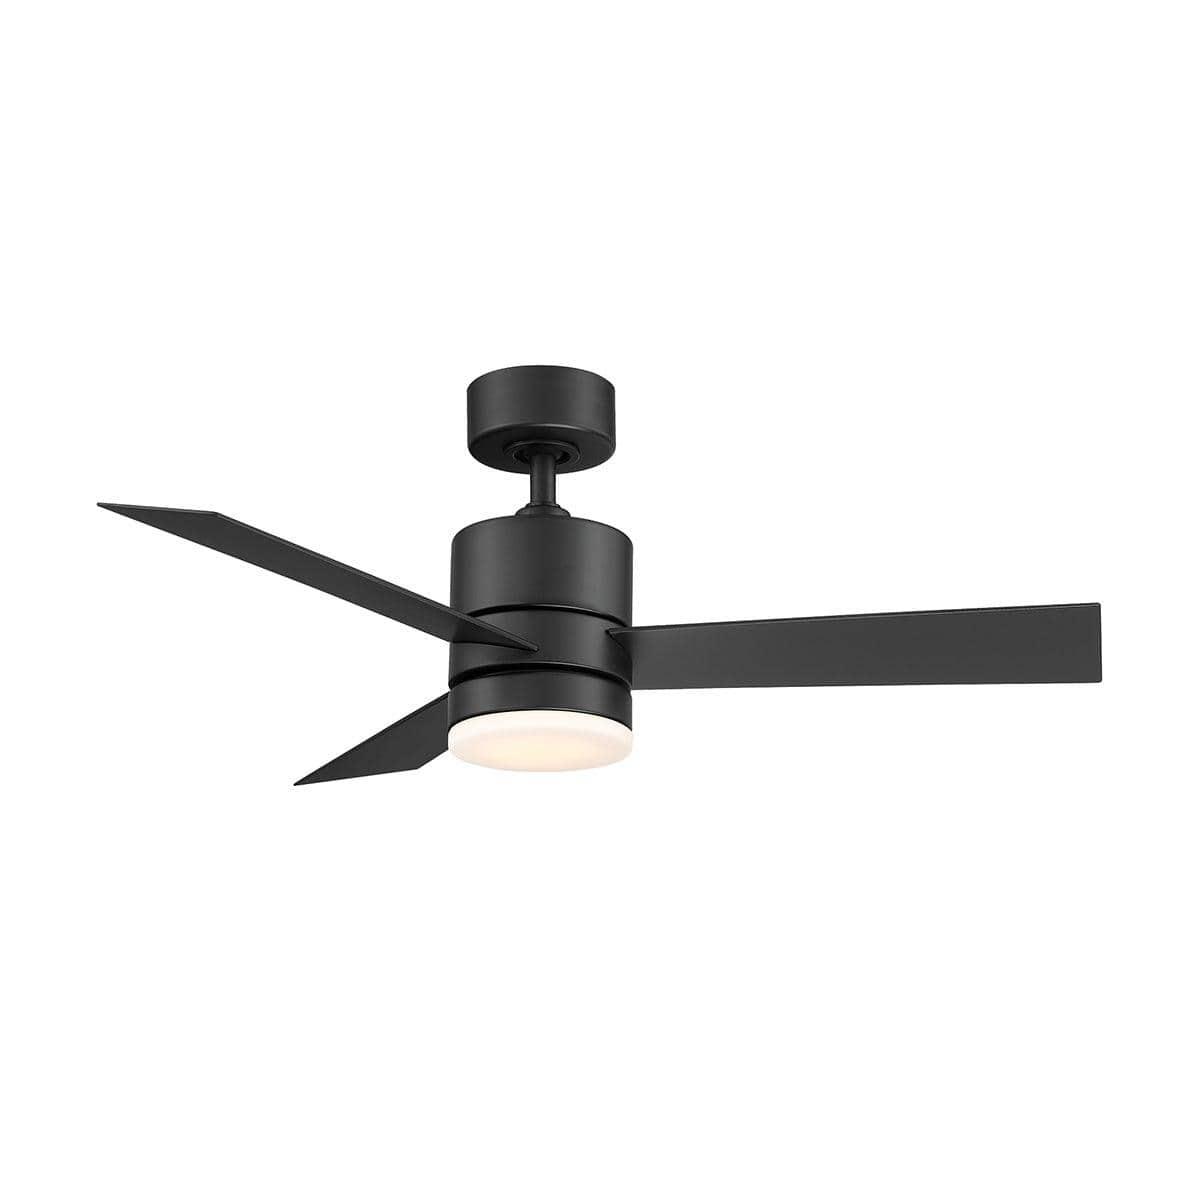 Modern Forms - Axis Ceiling Fan - FR-W1803-44L-27-MB | Montreal Lighting & Hardware